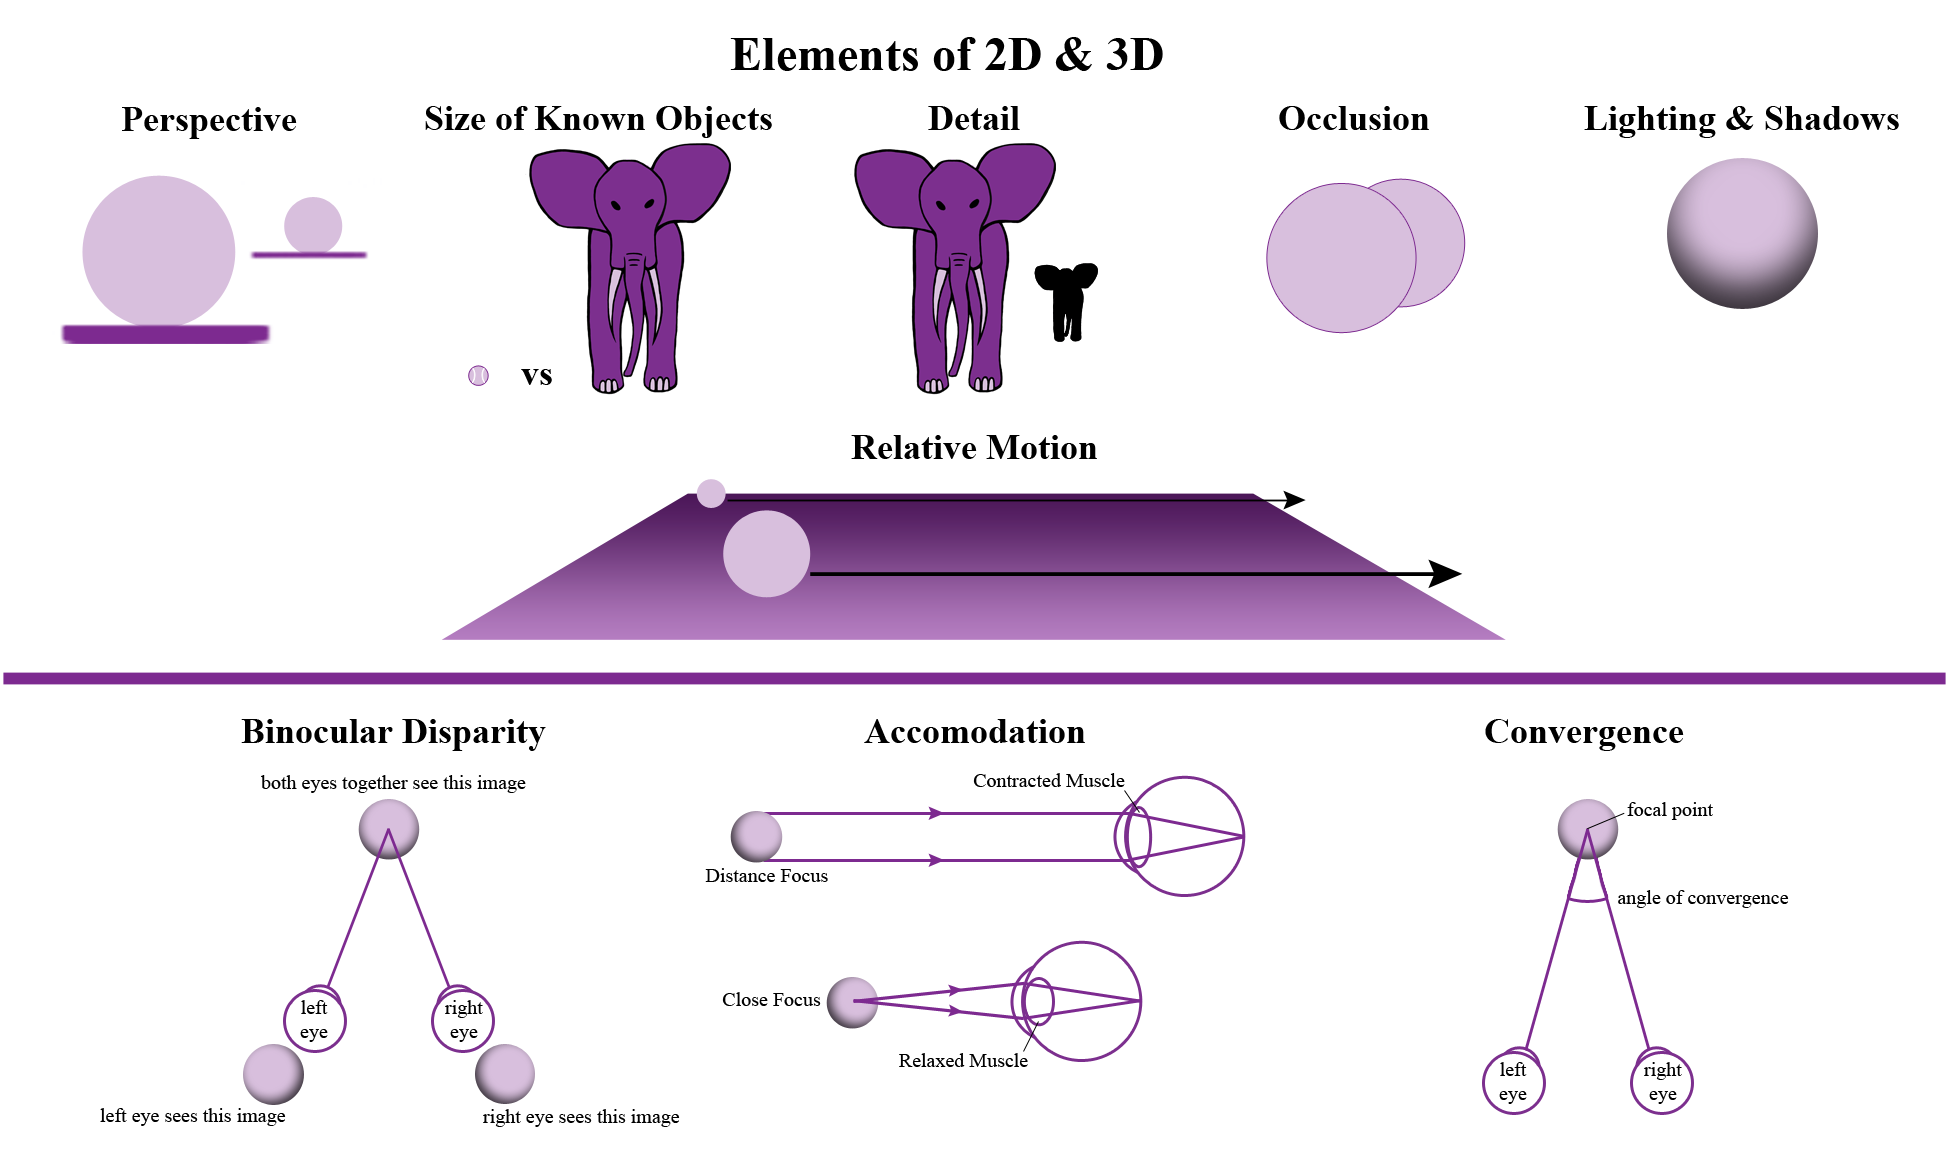 Elements of 2D and 3D